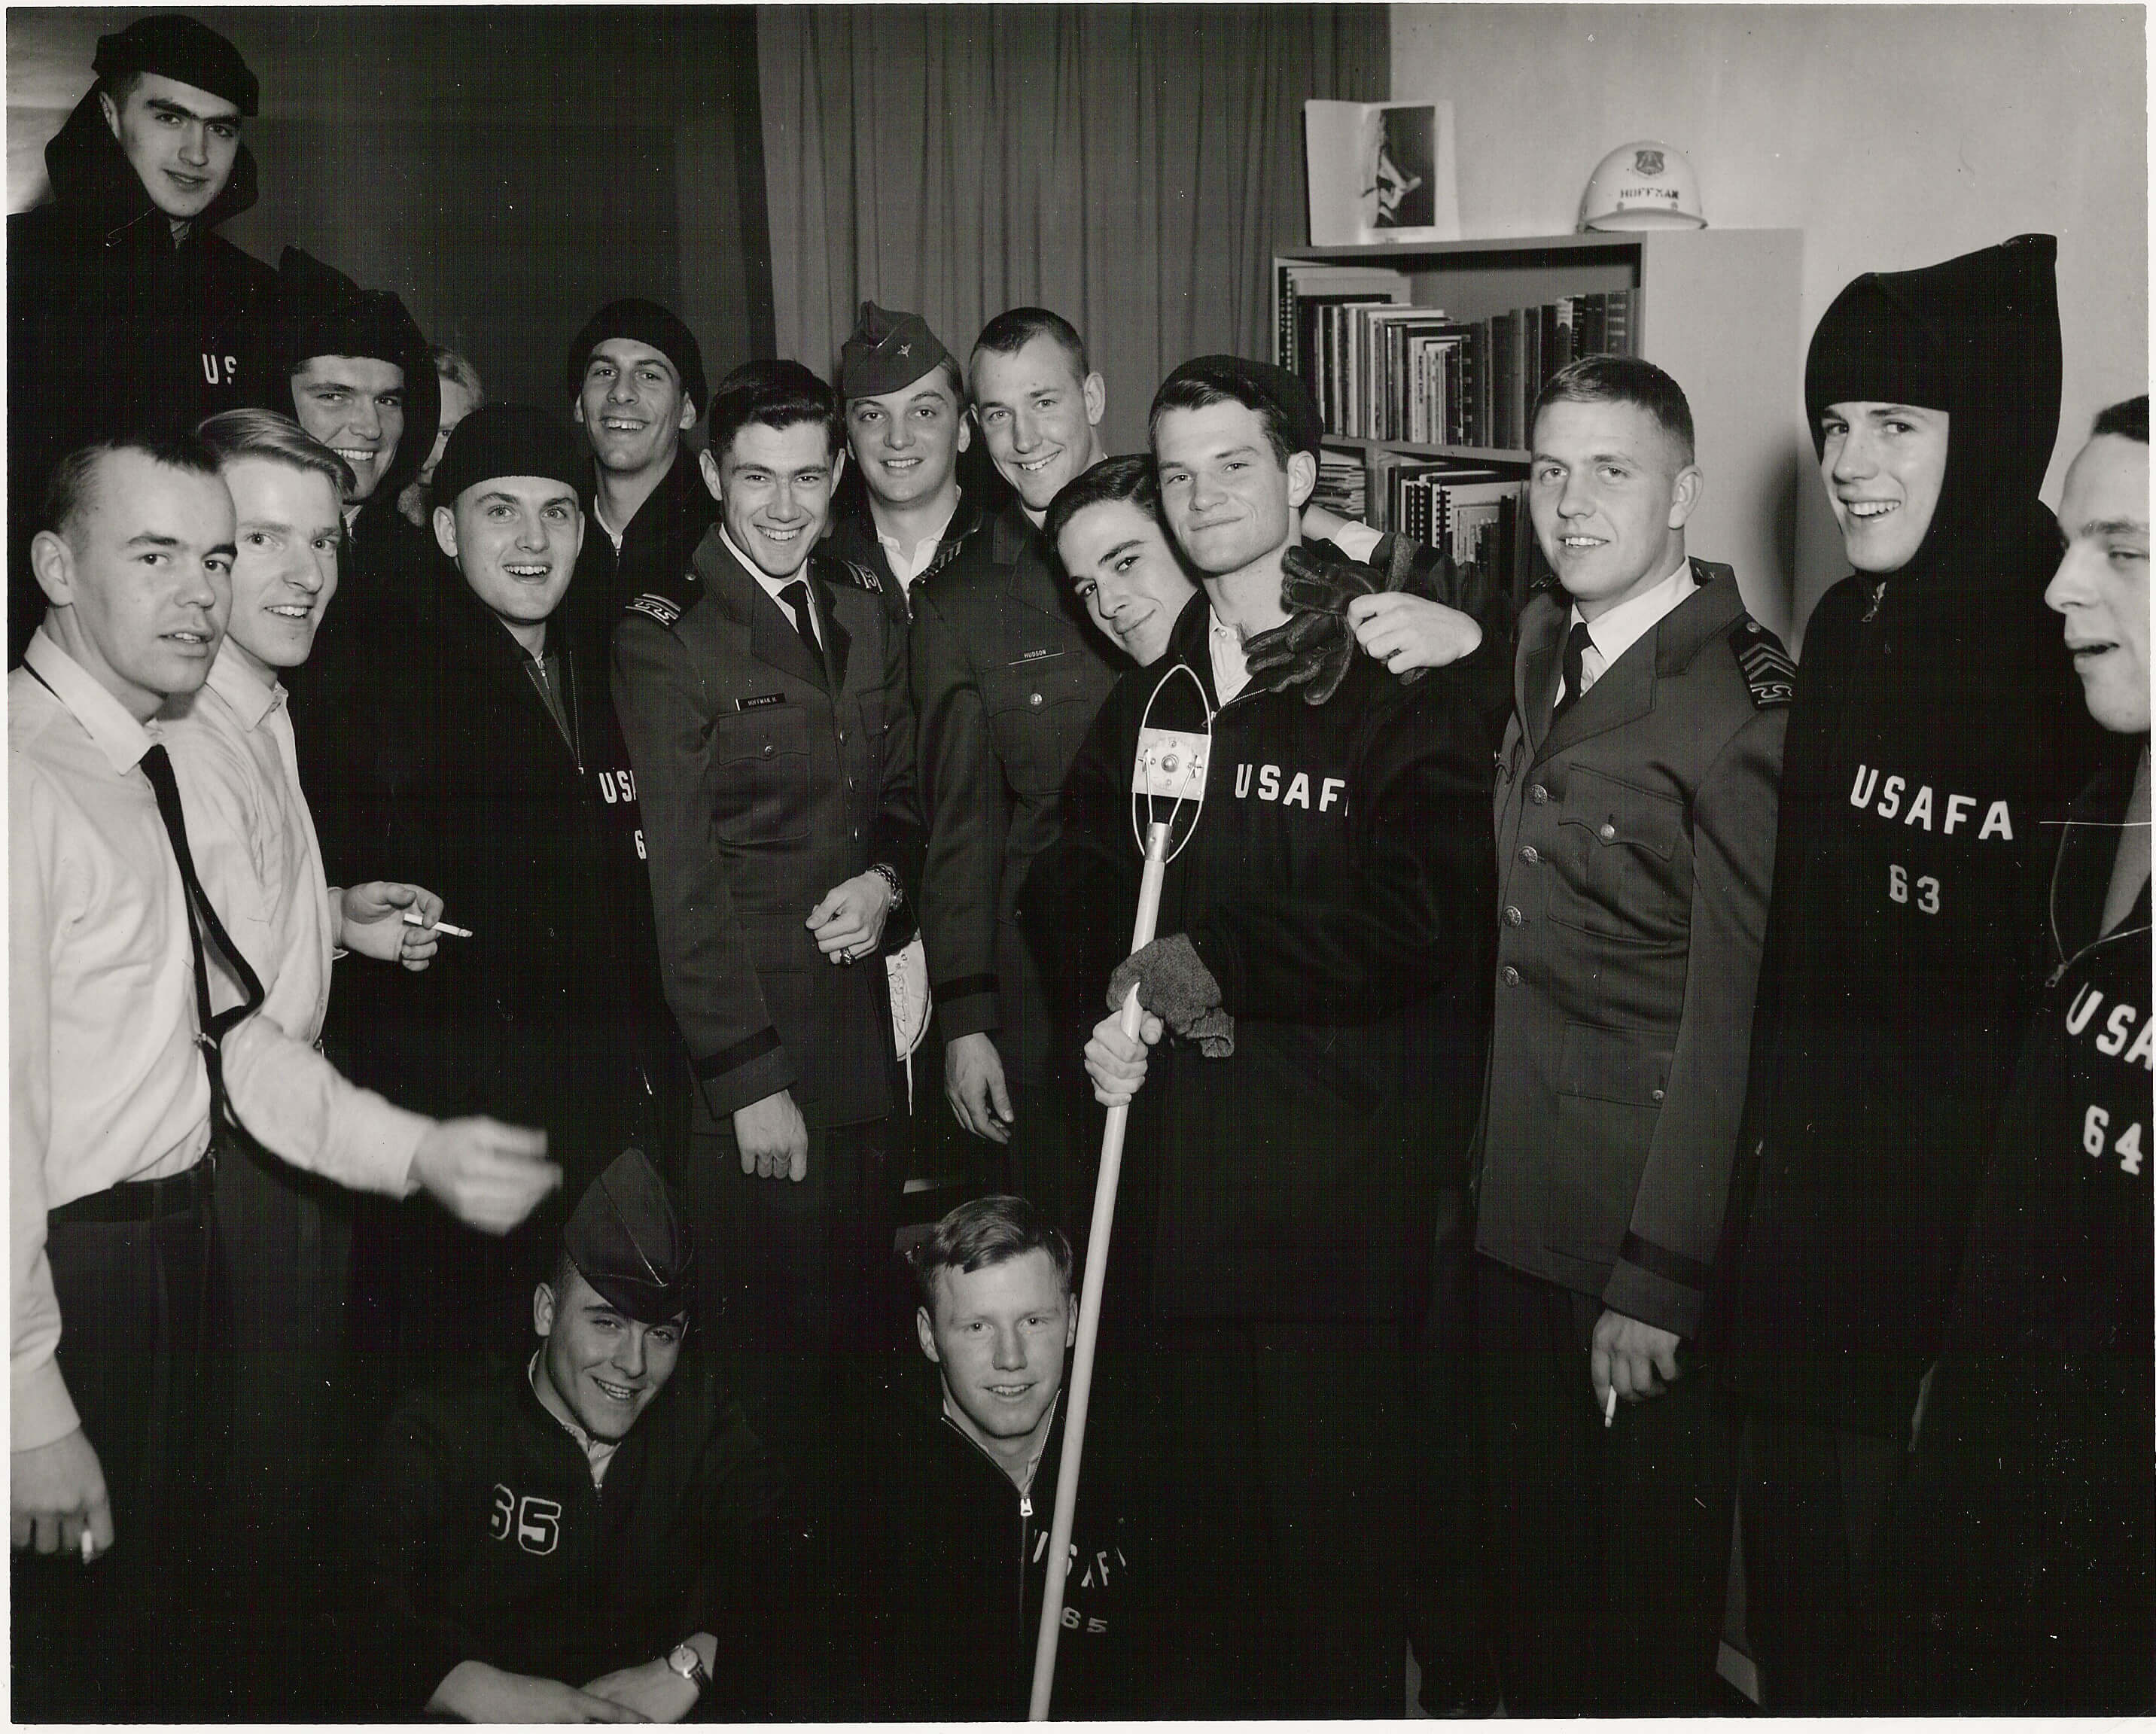 Hank Hoffman (eighth from left) poses for a photo in his Vandenberg Hall dorm room with other cadets in 1963